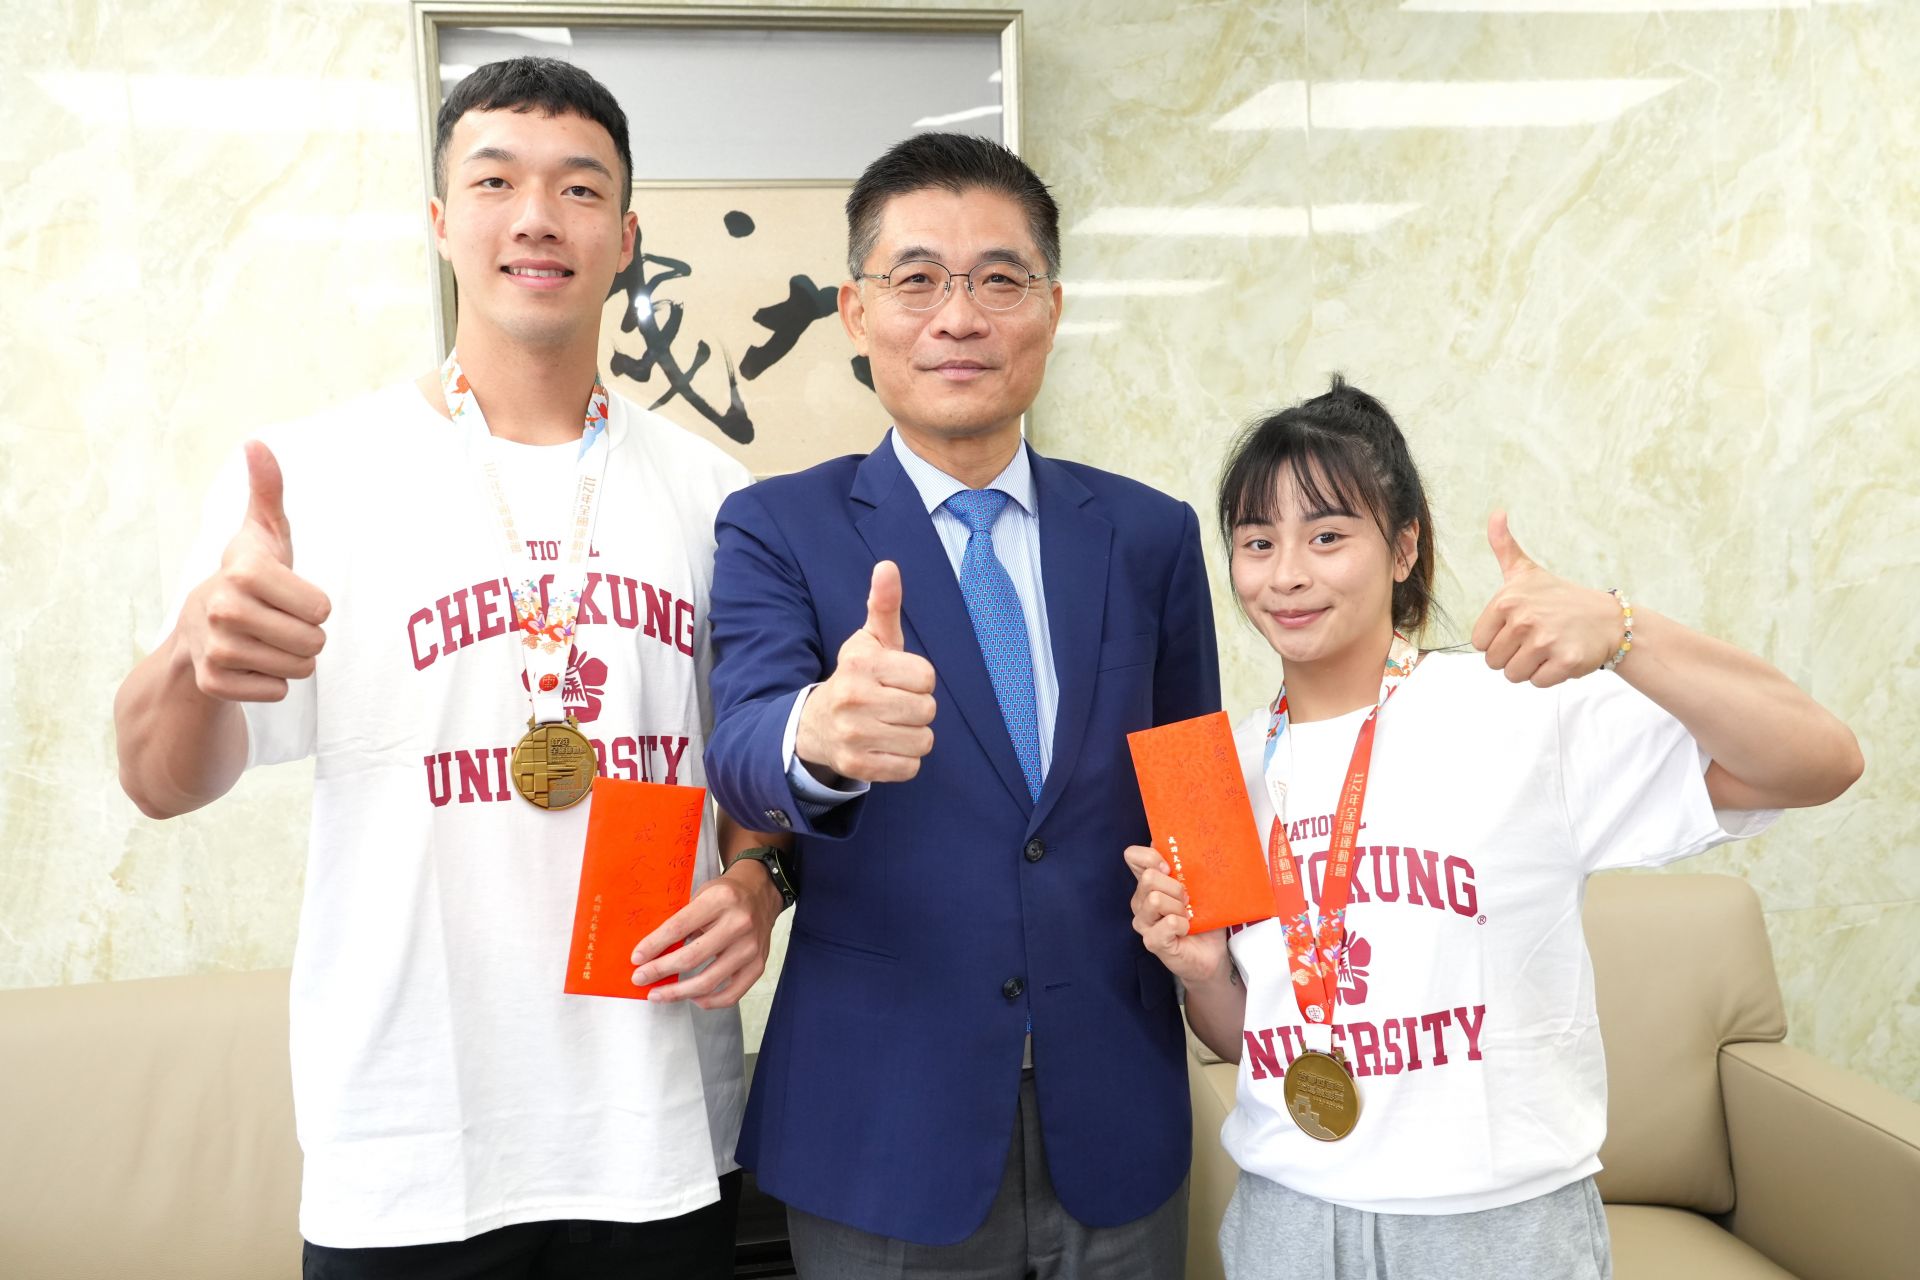 In the 112th National Games, NCKU won 2 gold and 3 bronze medals, with graduate students Fang and Wang earning the top honors.